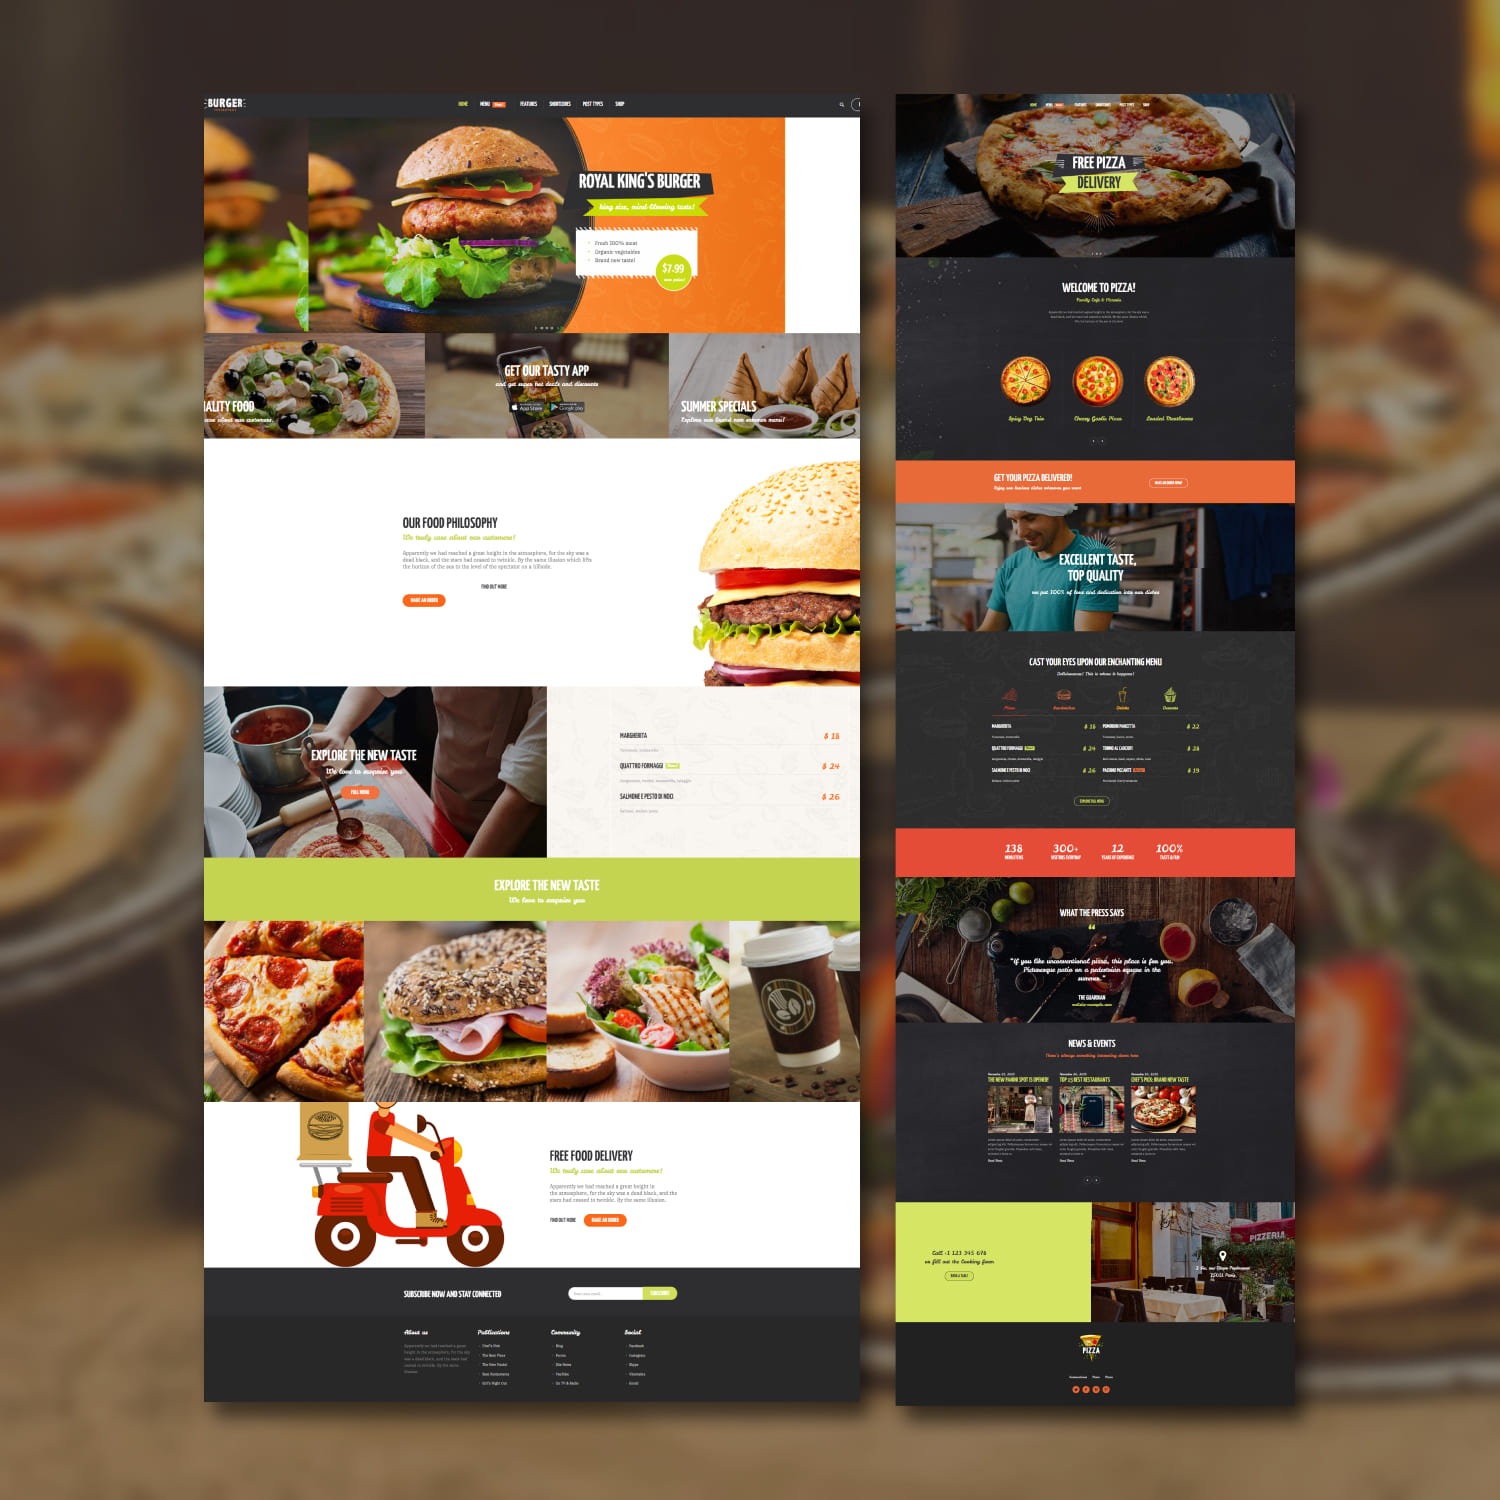 A selection of colorful pages of the WordPress template on the theme of fast food and pizzeria.